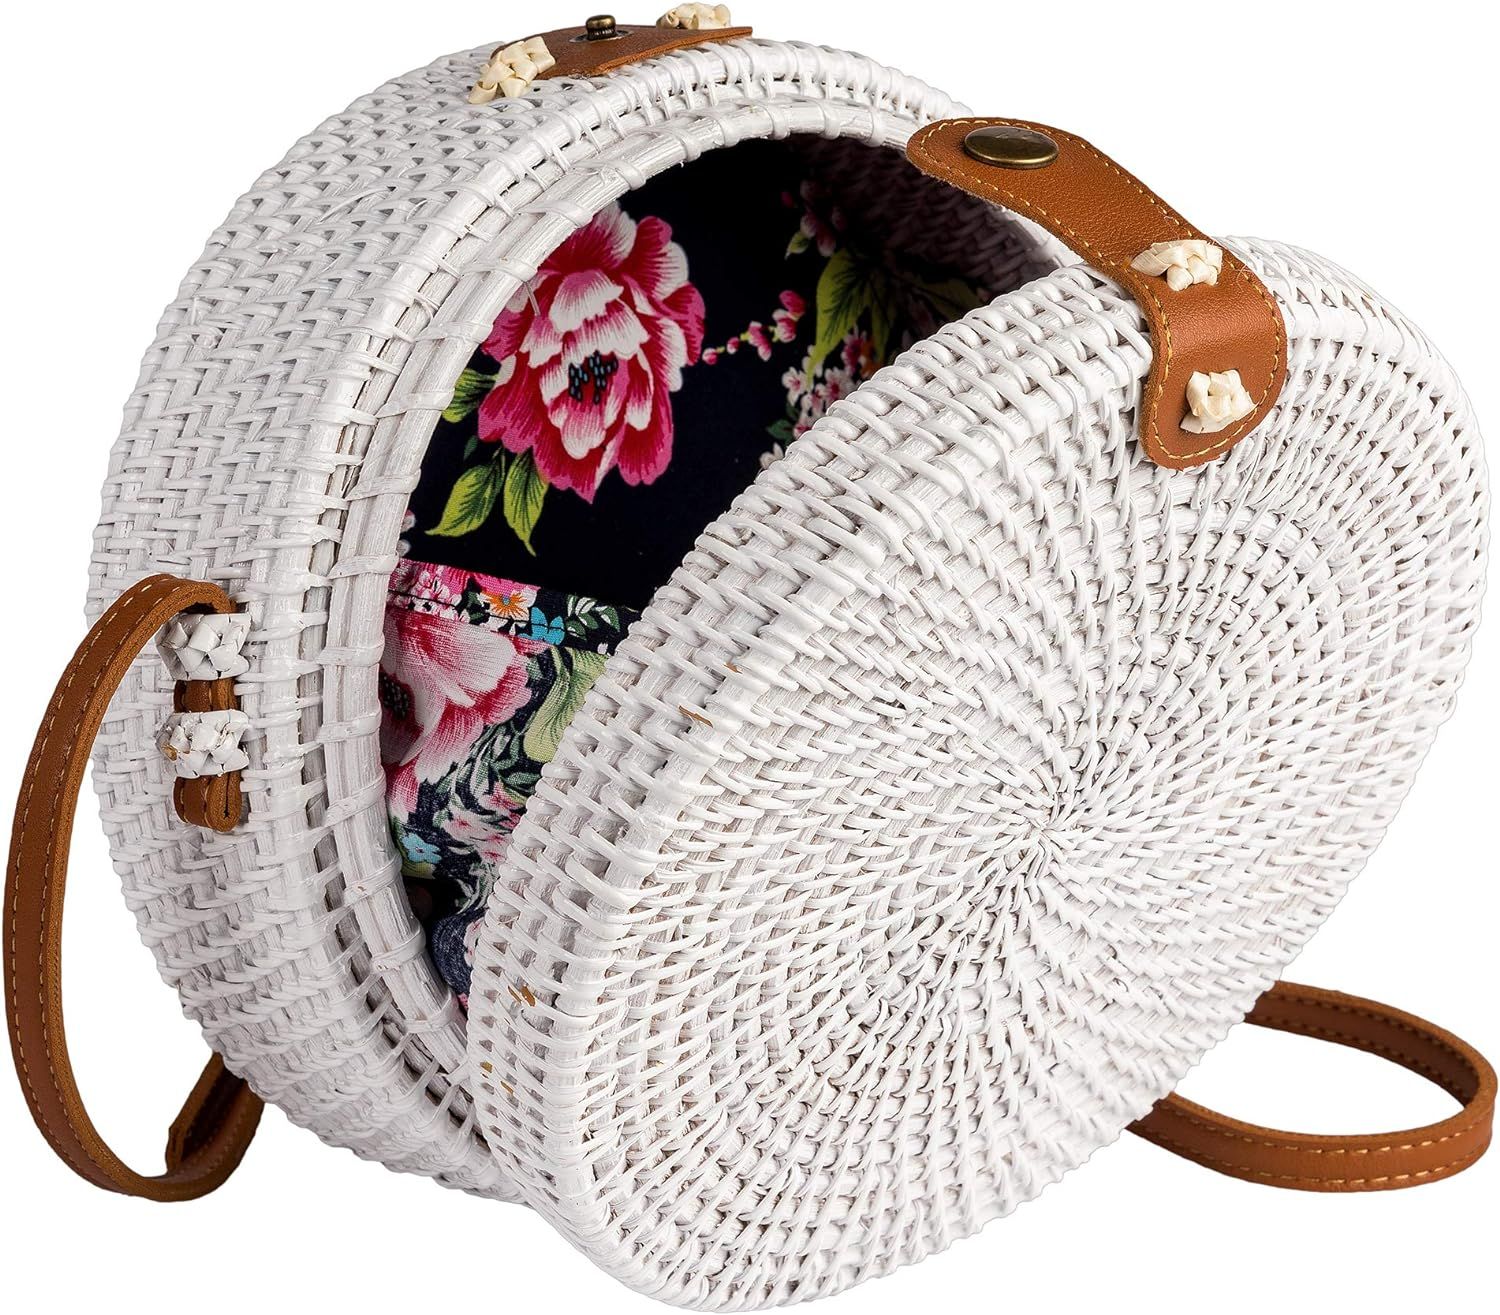 Handwoven Round Rattan Bag Shoulder Leather Straps Natural Chic Hand NATURAL NEO | Amazon (US)